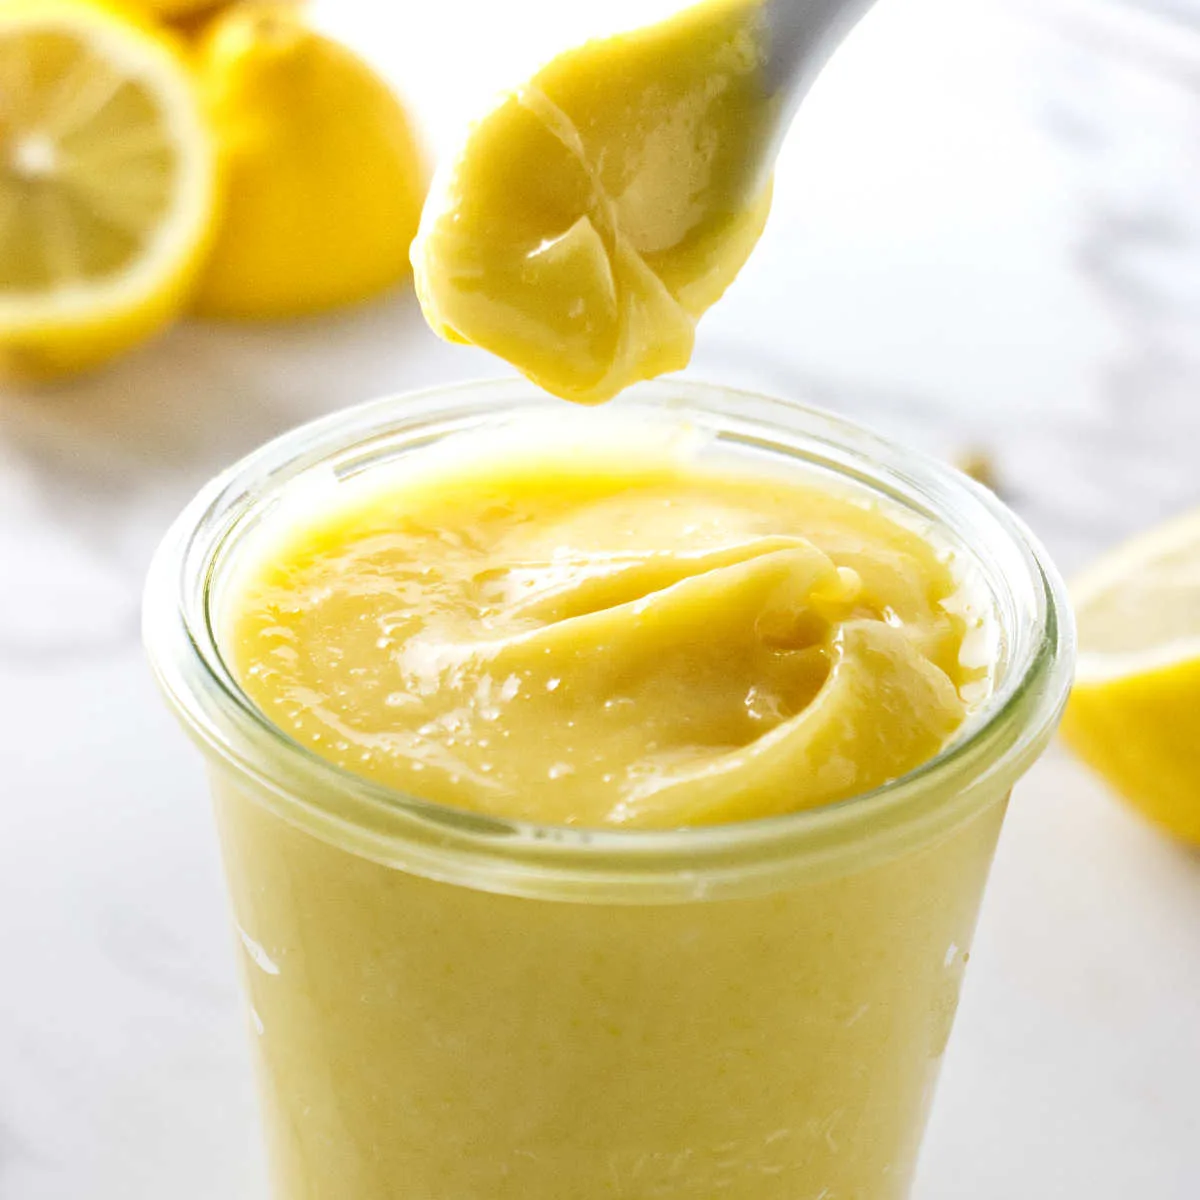 Lemon curd made with egg yolks only is thick and clinging to a spoon.